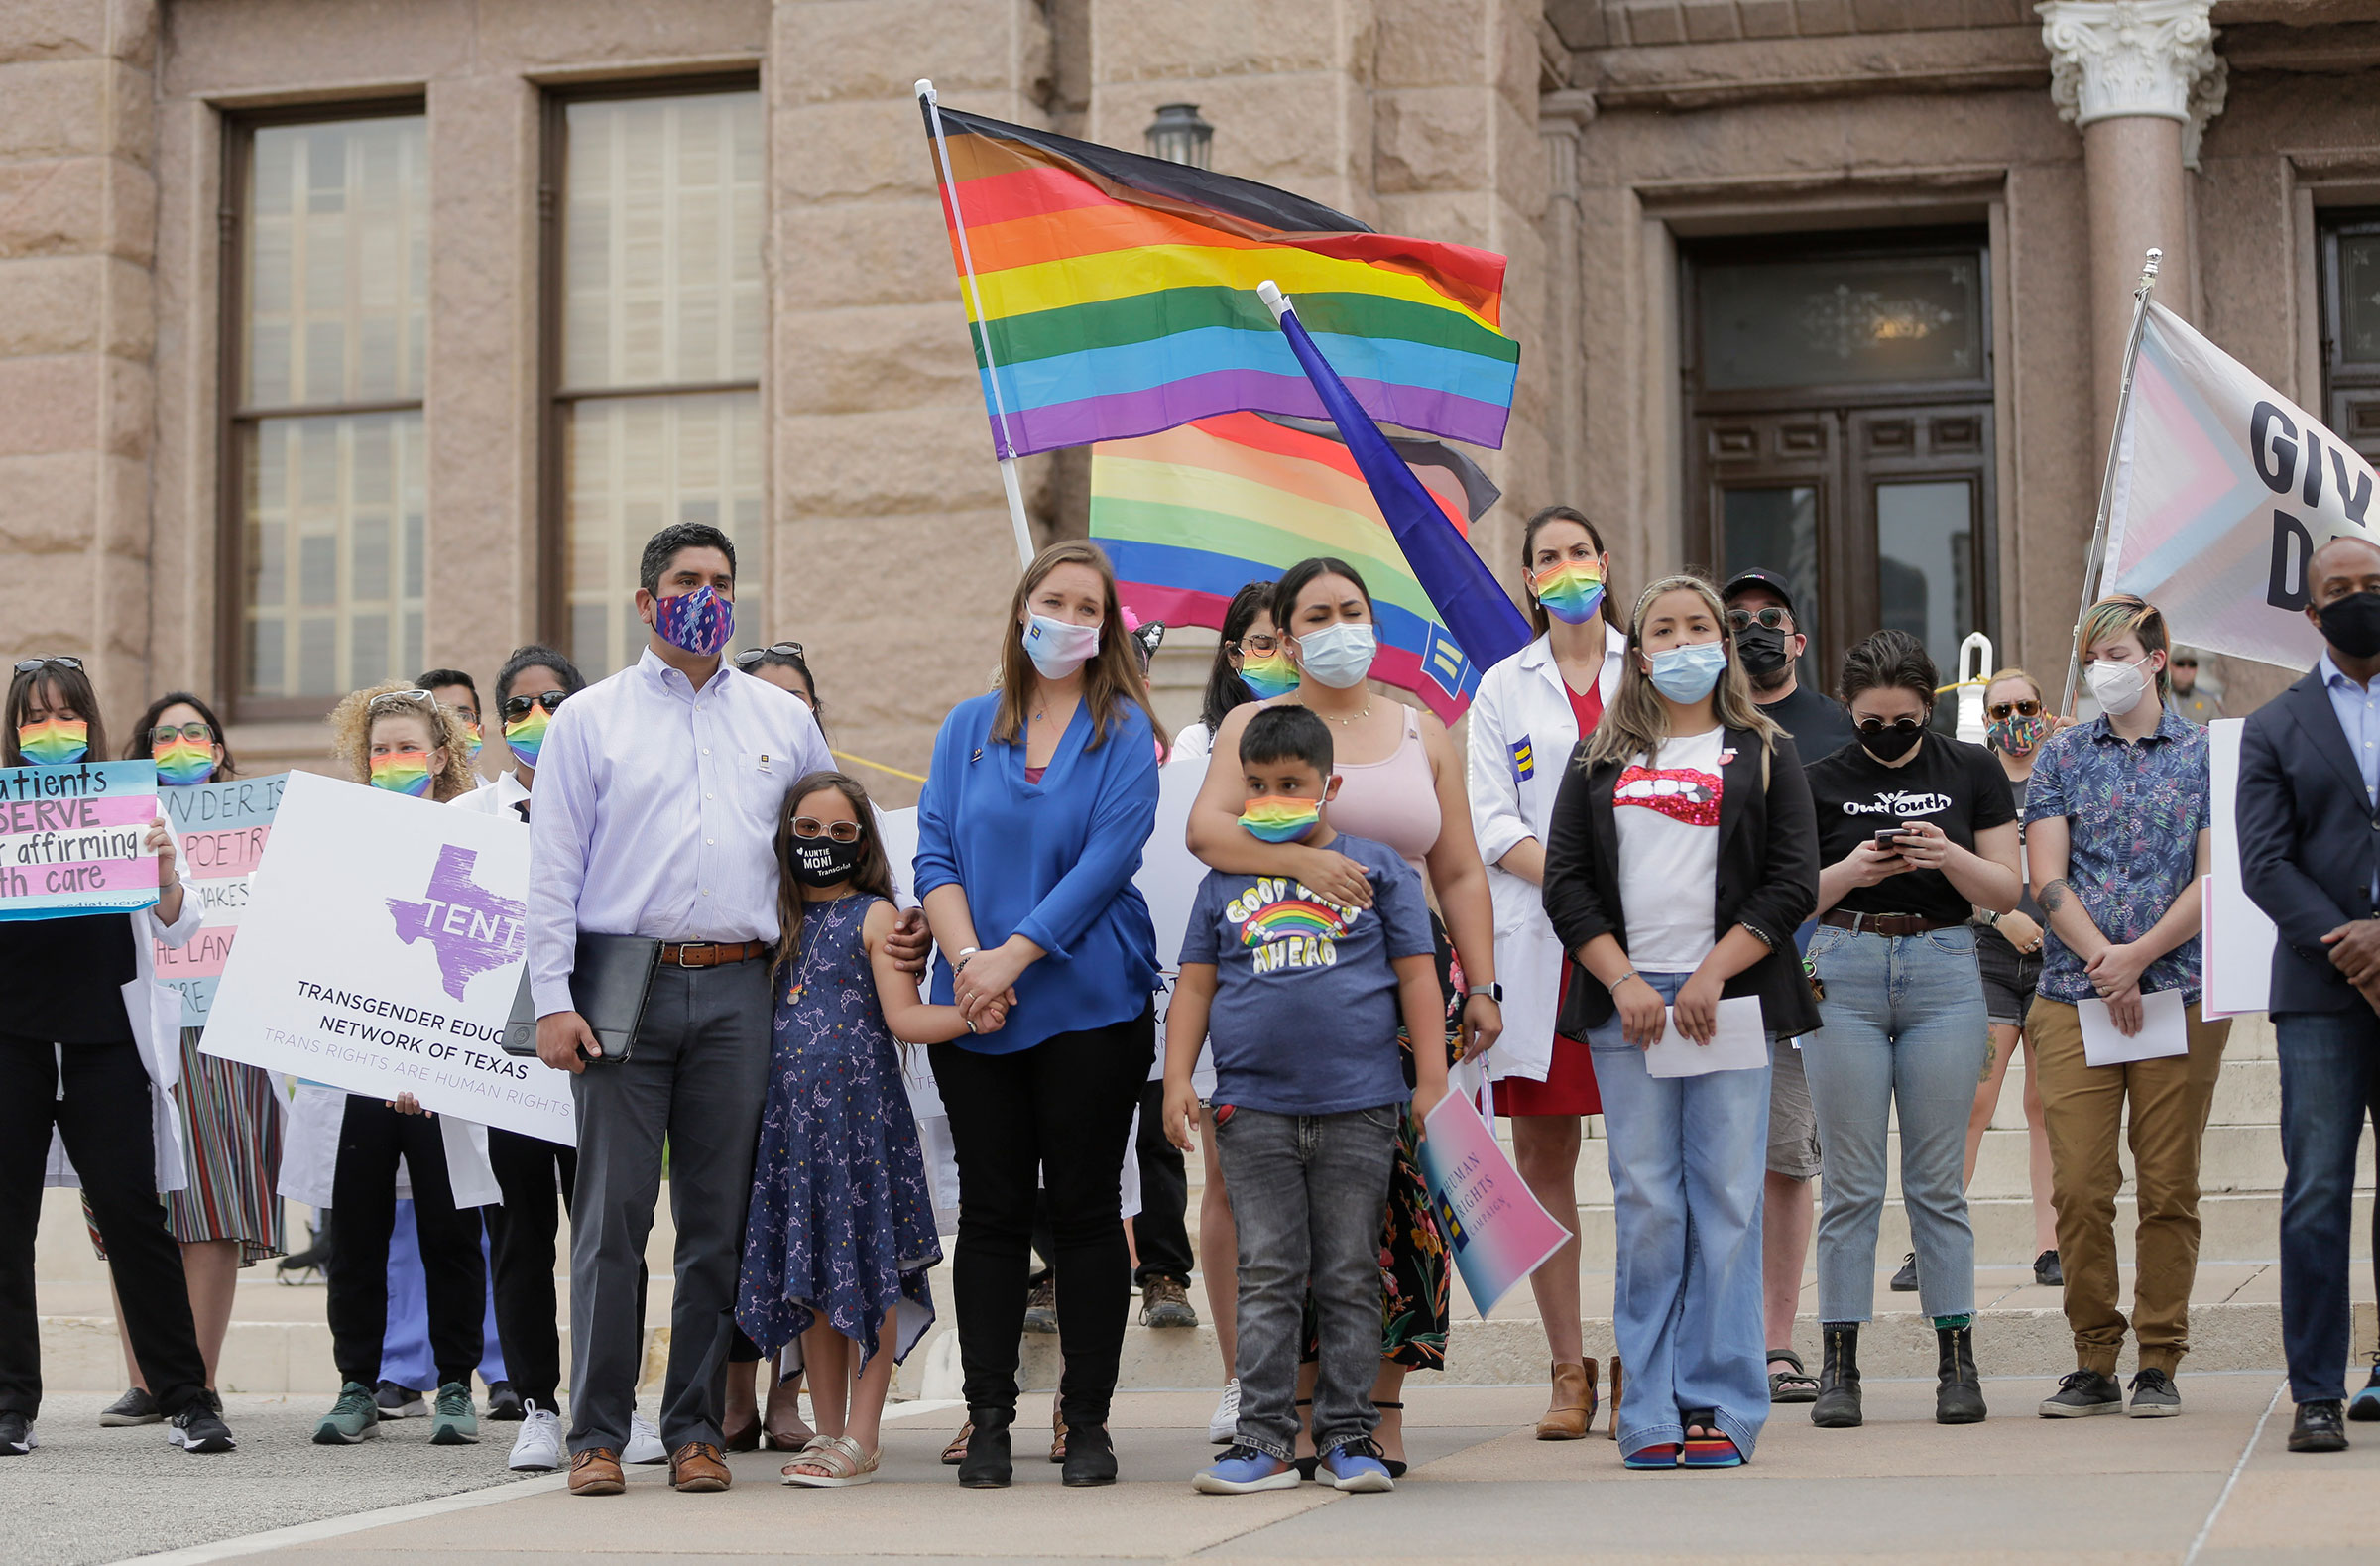 LGBTQ advocates including representatives from Equality Texas, the Transgender Education Network of Texas, Texas Freedom Network, ACLU of Texas, Lambda Legal, medical and health care professionals, and parents of transgender children rally at the Texas State Capitol on May 4, 2021 in Austin to stop proposed medical care ban legislation that would criminalize gender-affirming care. (Erich Schlegel—Images for Human Rights Campaign/AP)